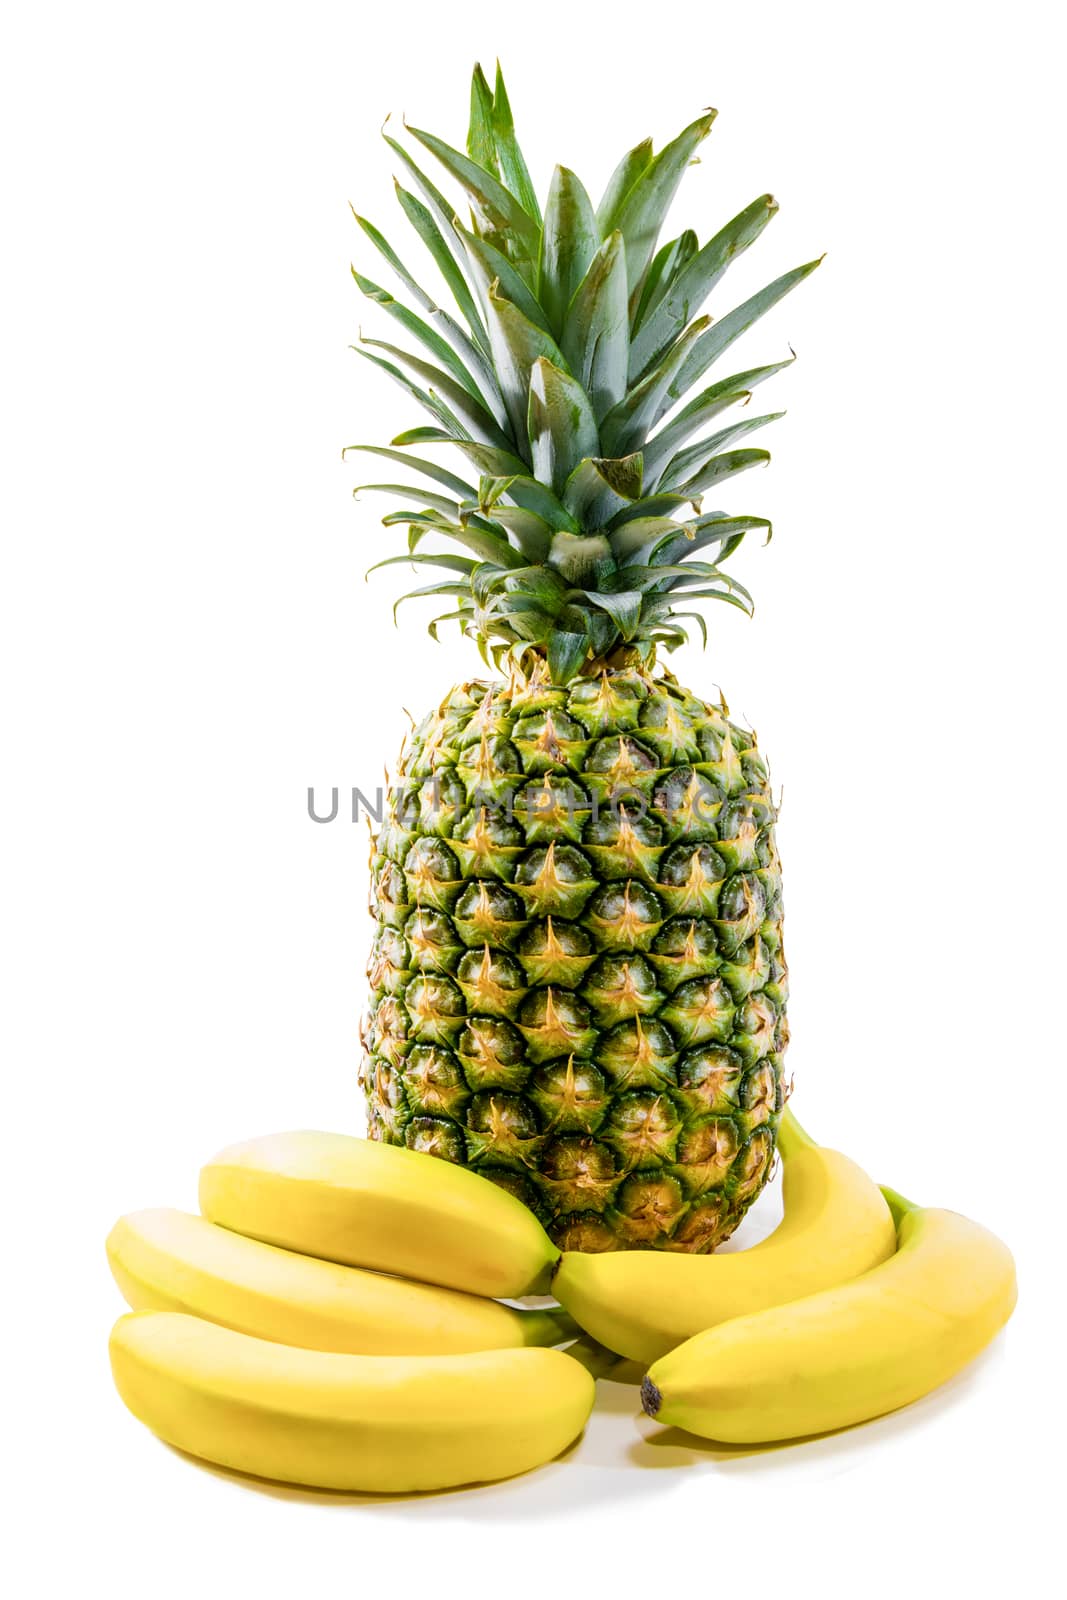 Pineapple surrounded by bananas  against white background by ben44